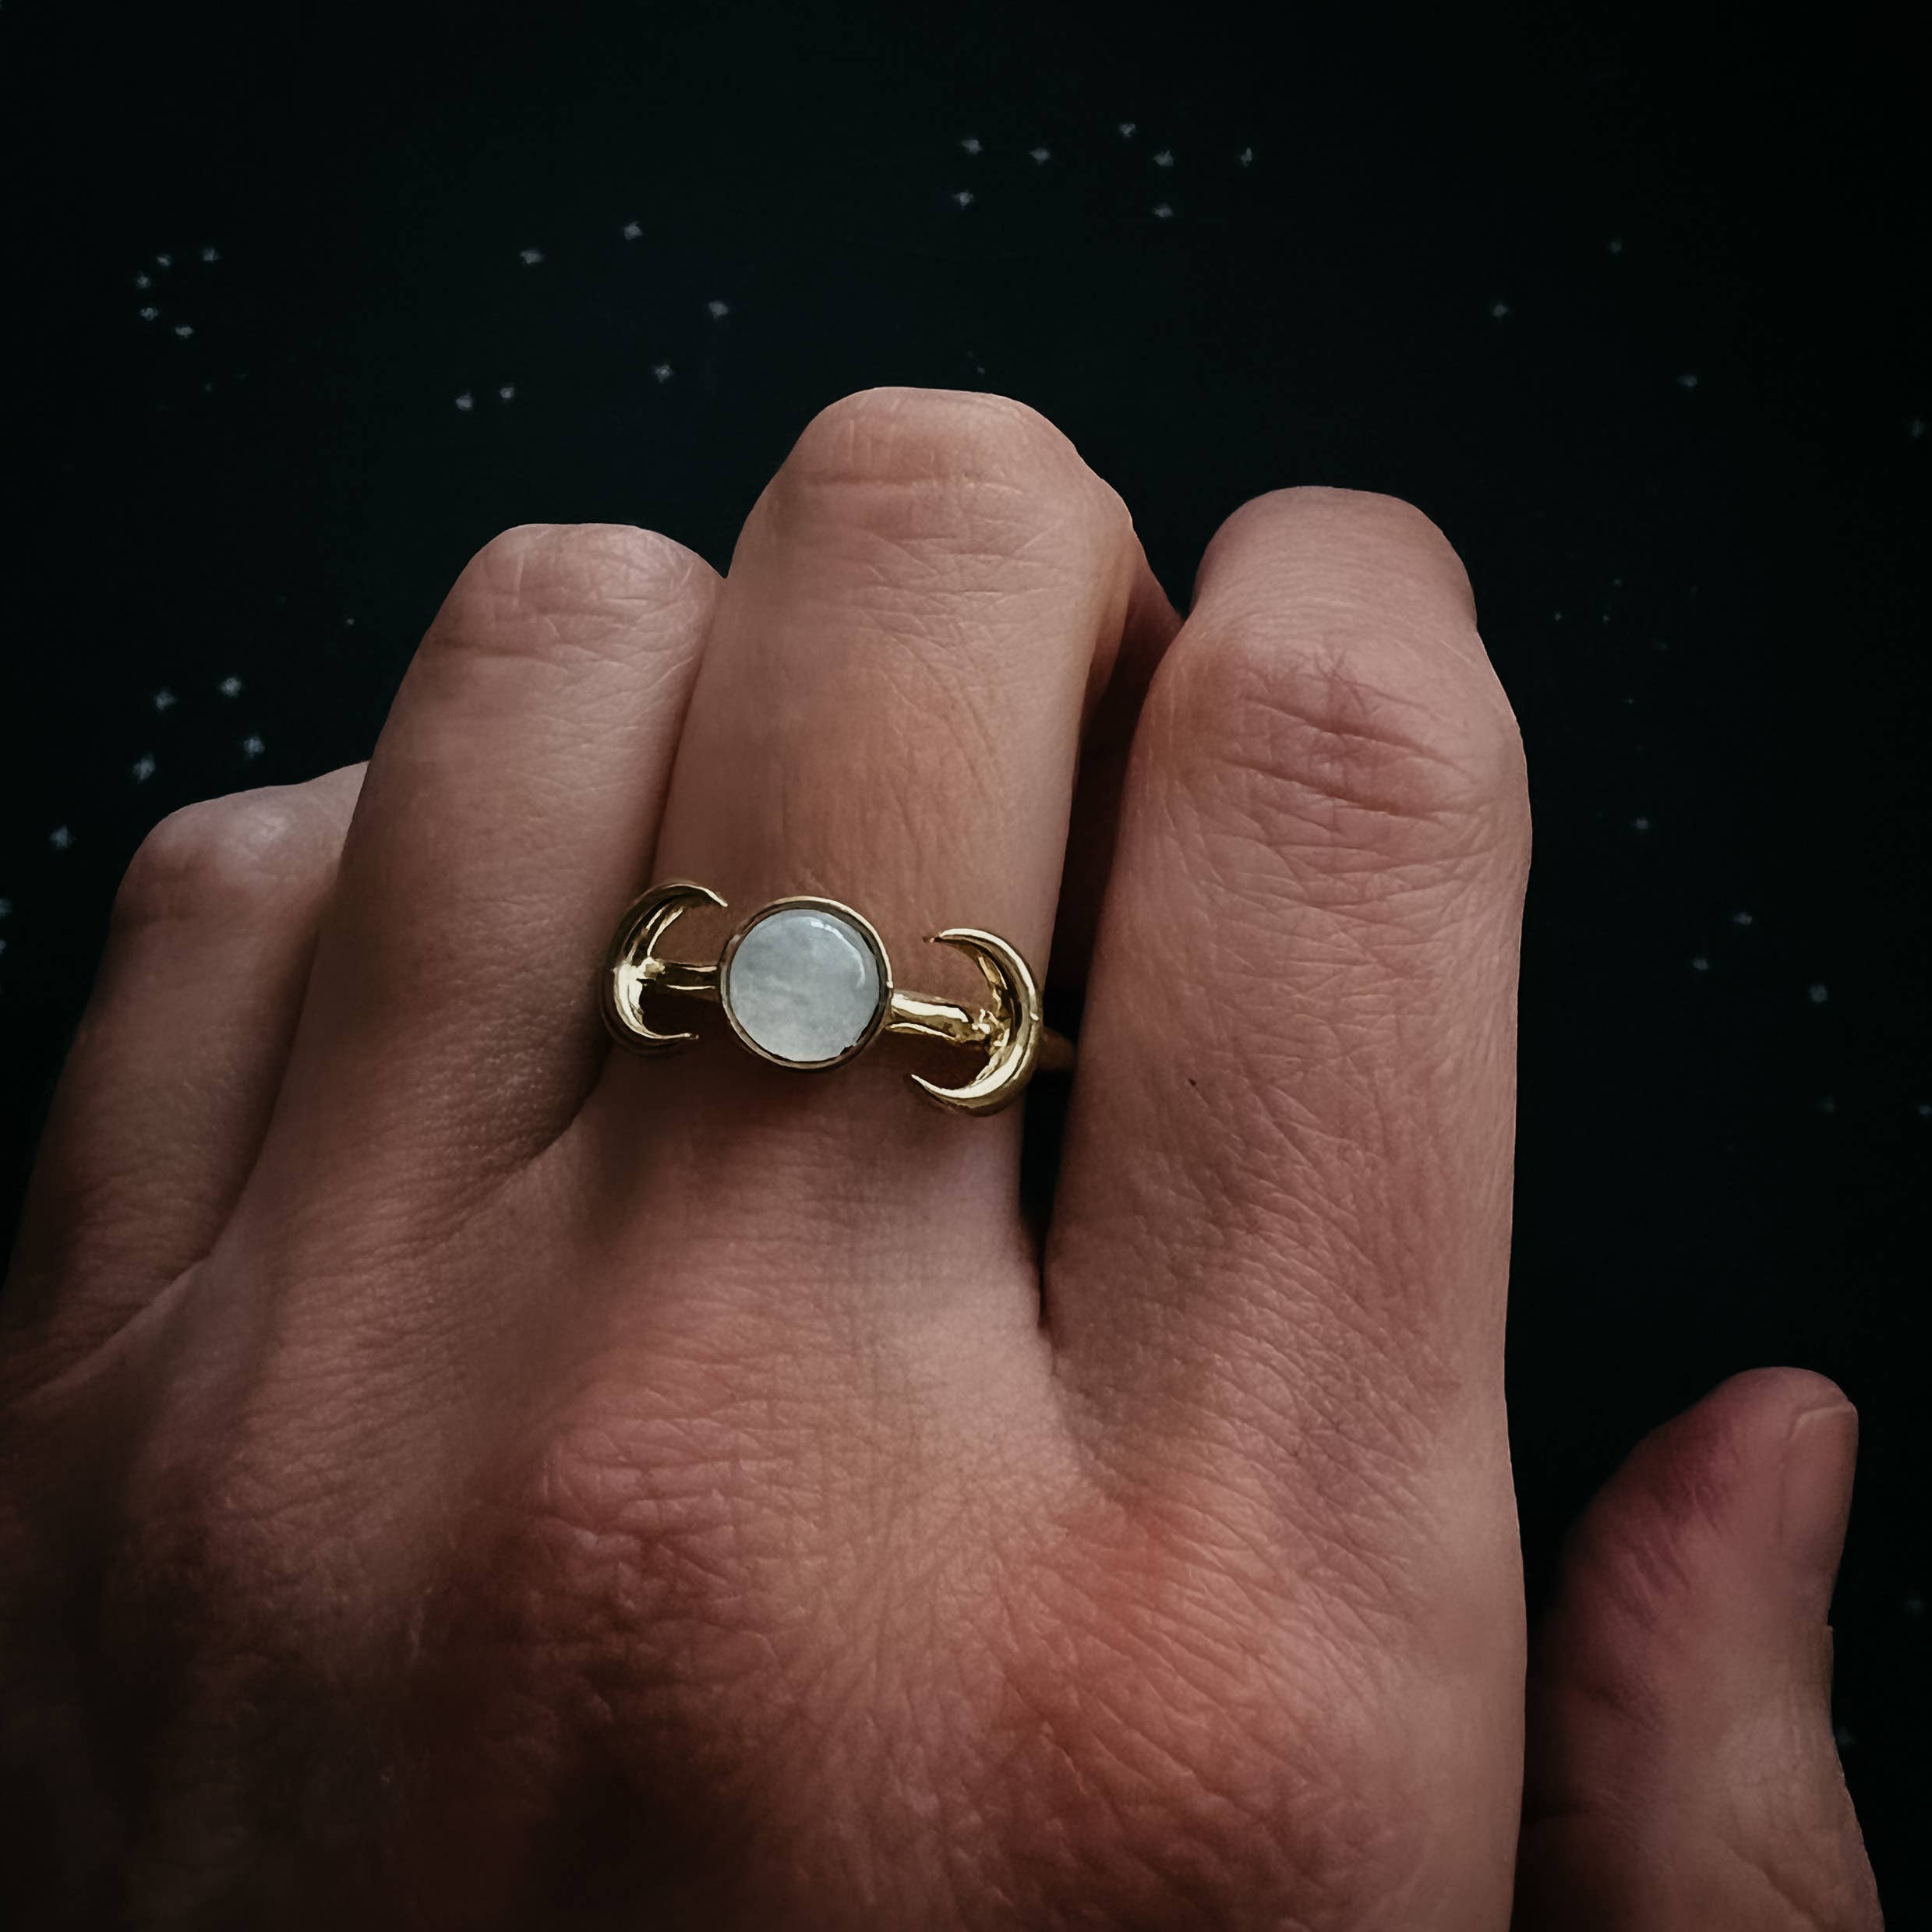 Lunar Witch Moonstone Ring - The Gilded Witch